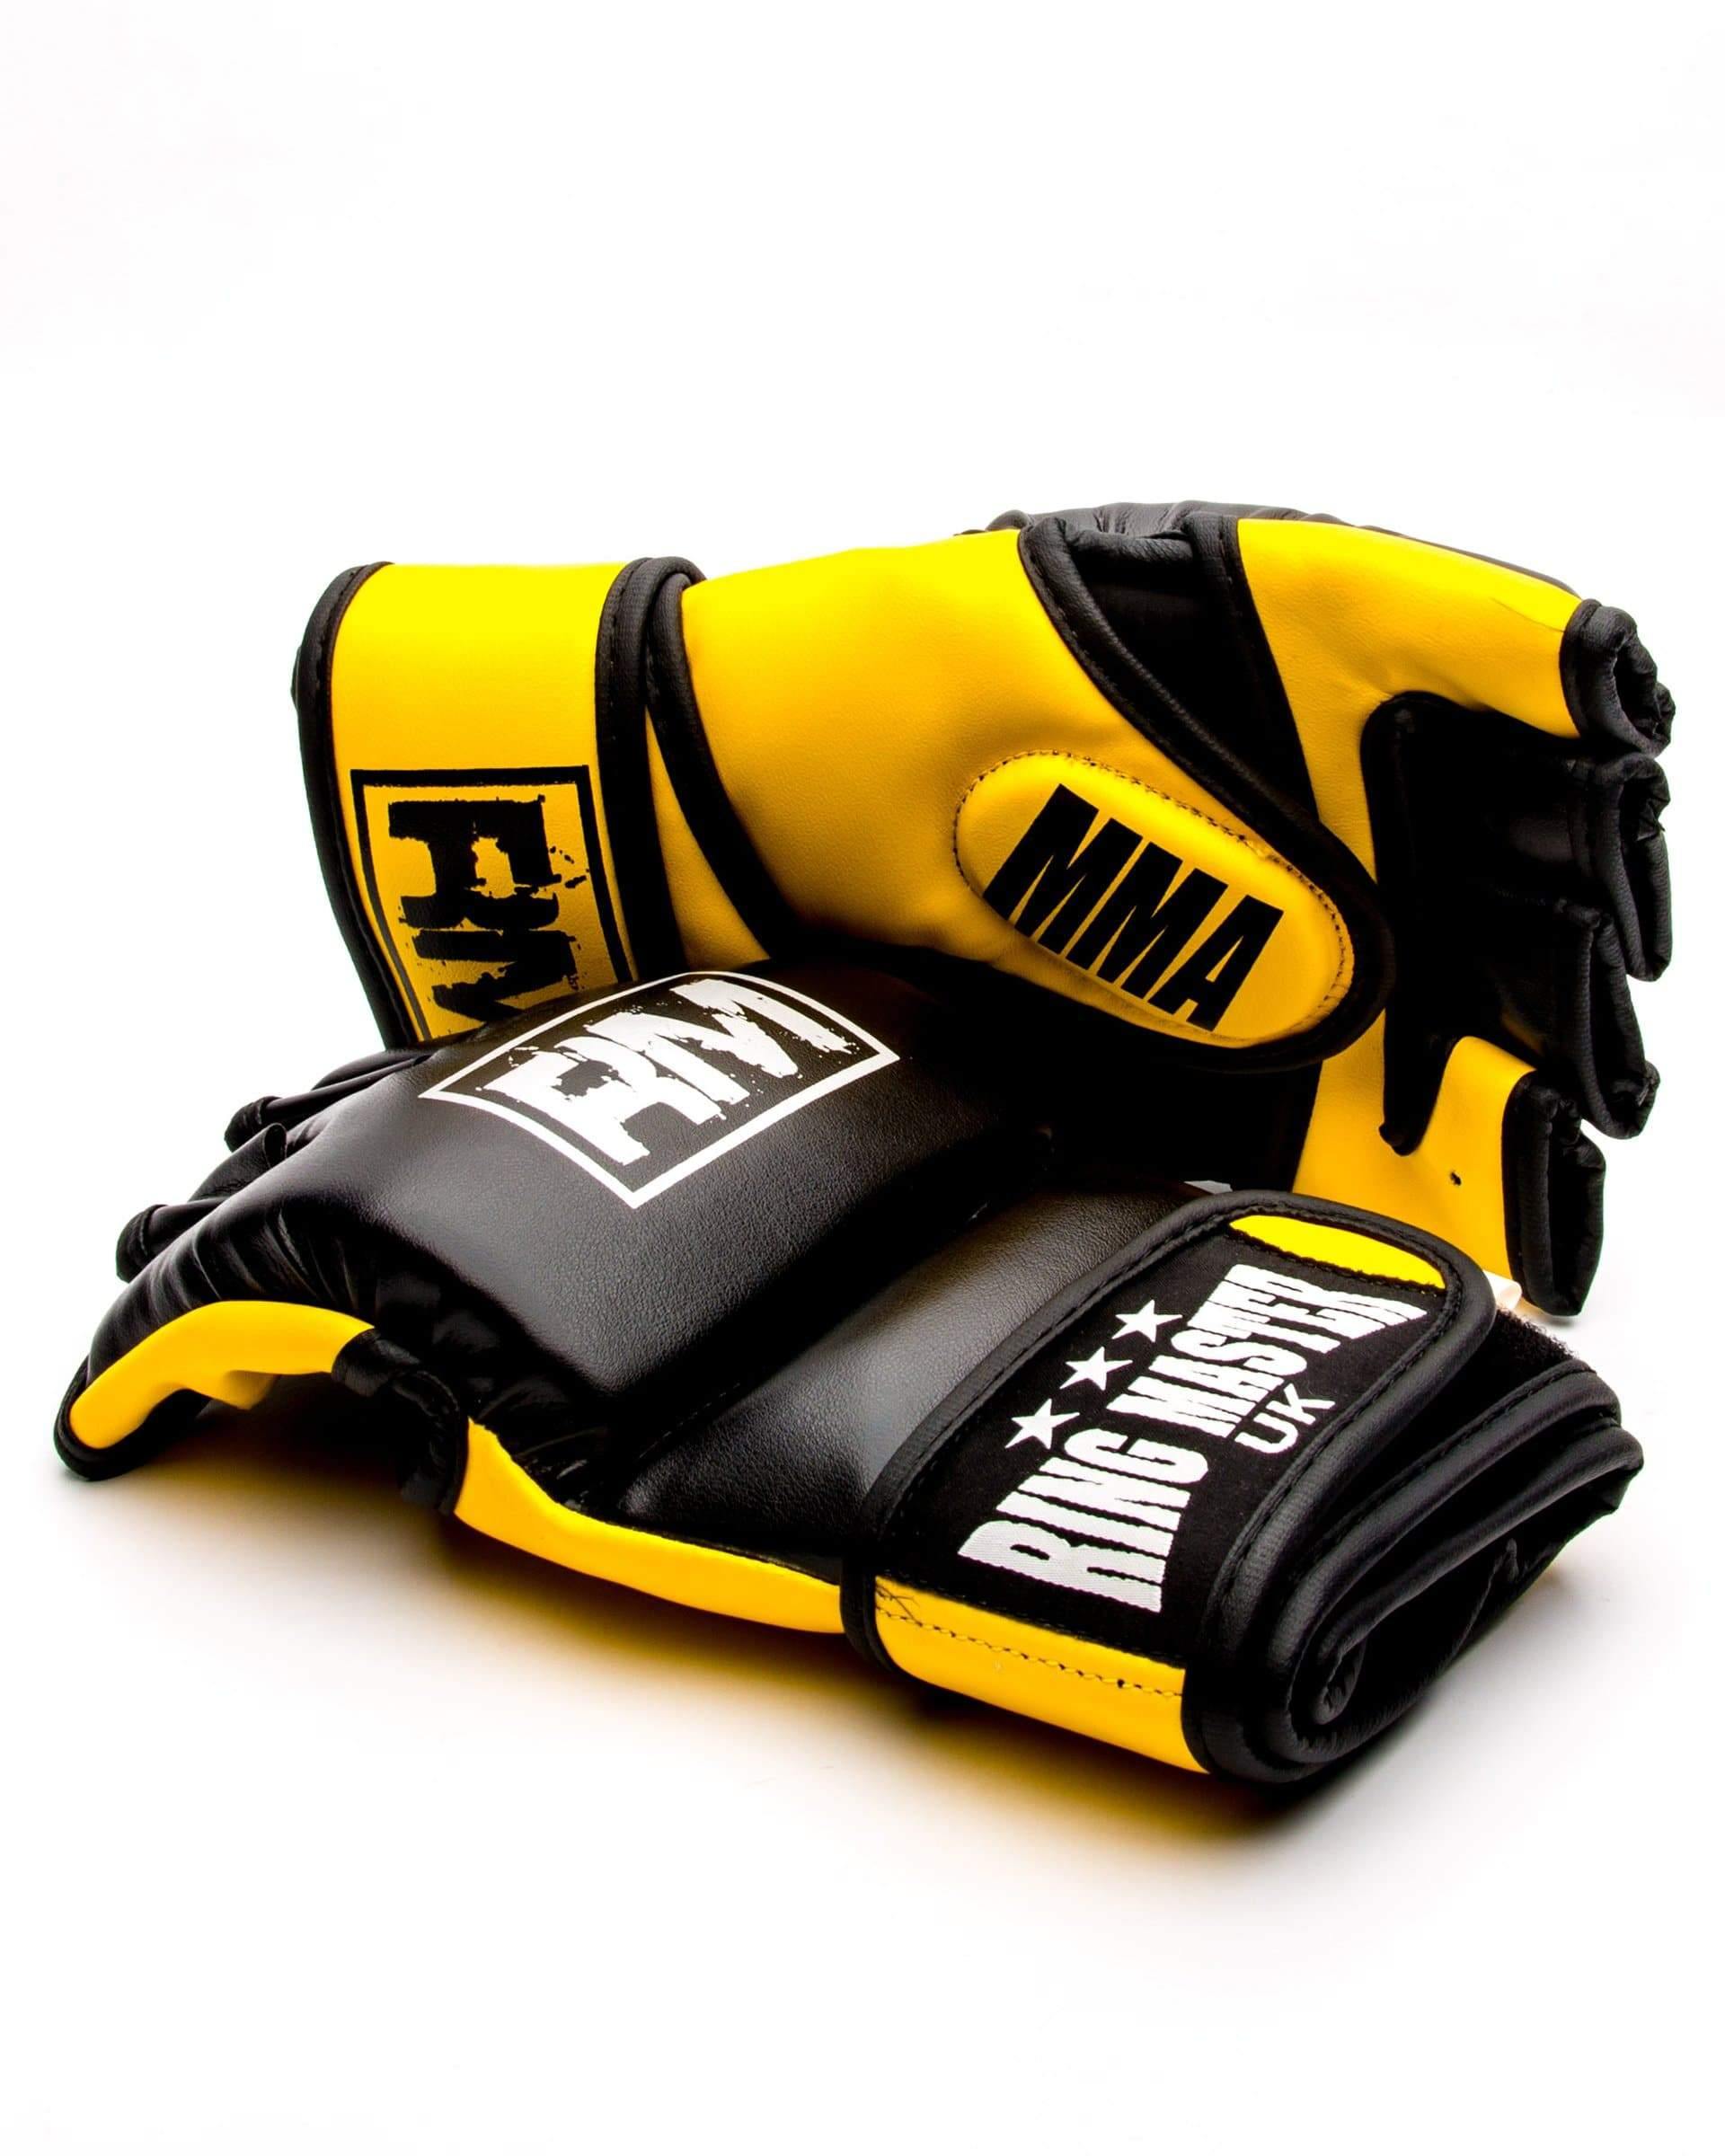 RingMaster Sports MMA Gloves Synthetic Leather Black and Yellow Image 4